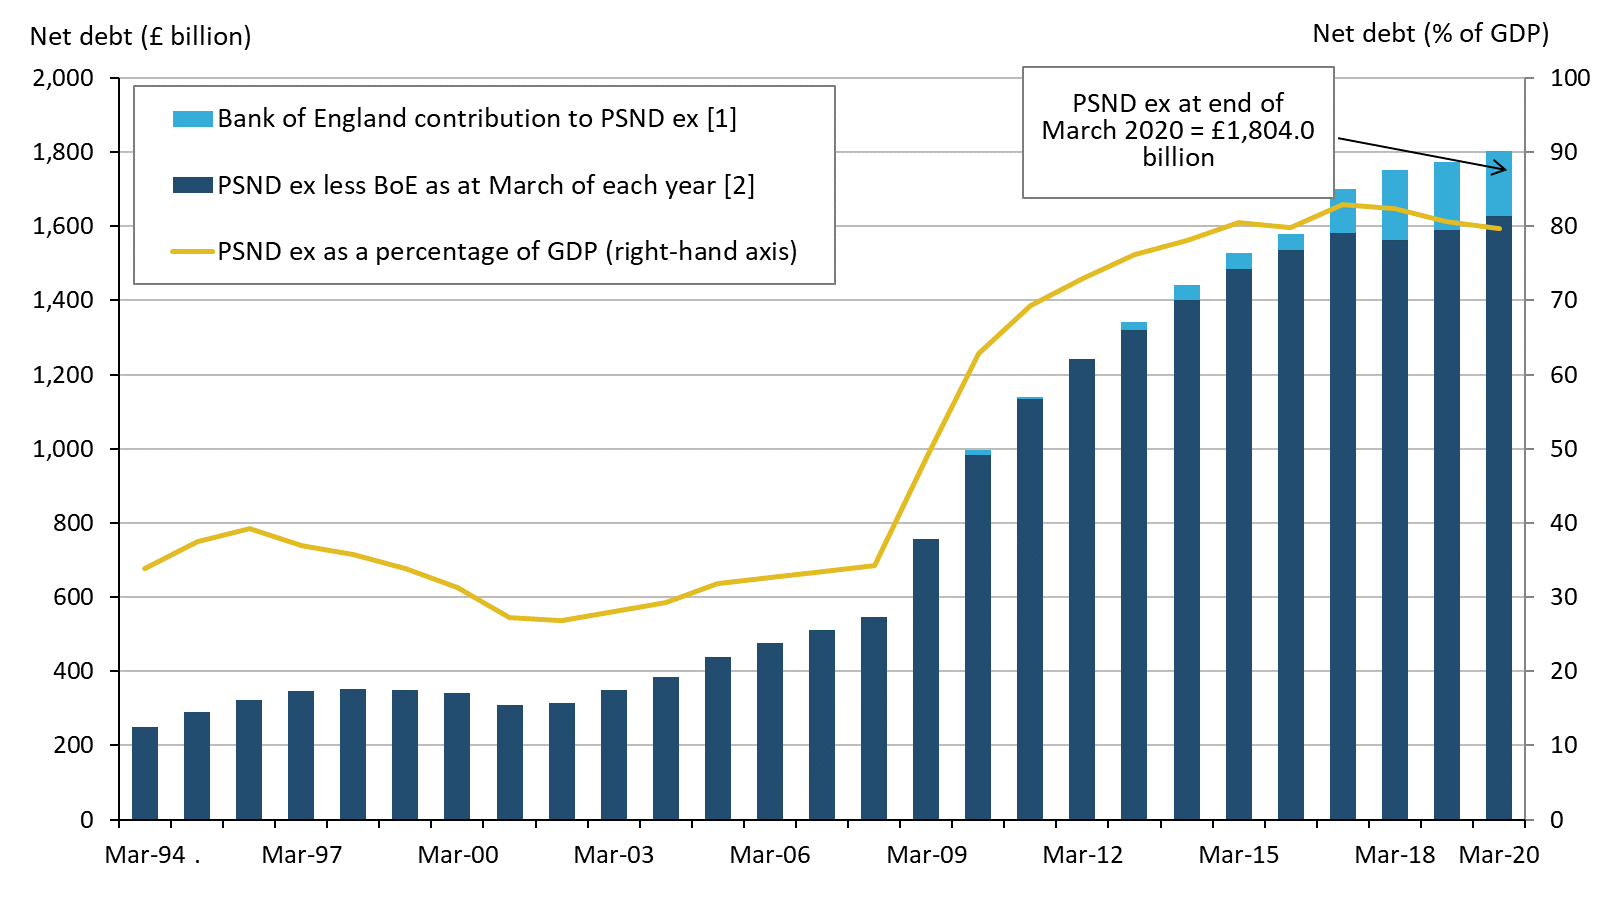 Public sector net debt excluding public sector banks at the end of March 2020 stood at approximately £1.8 trillion (or £1,804.0 billion).